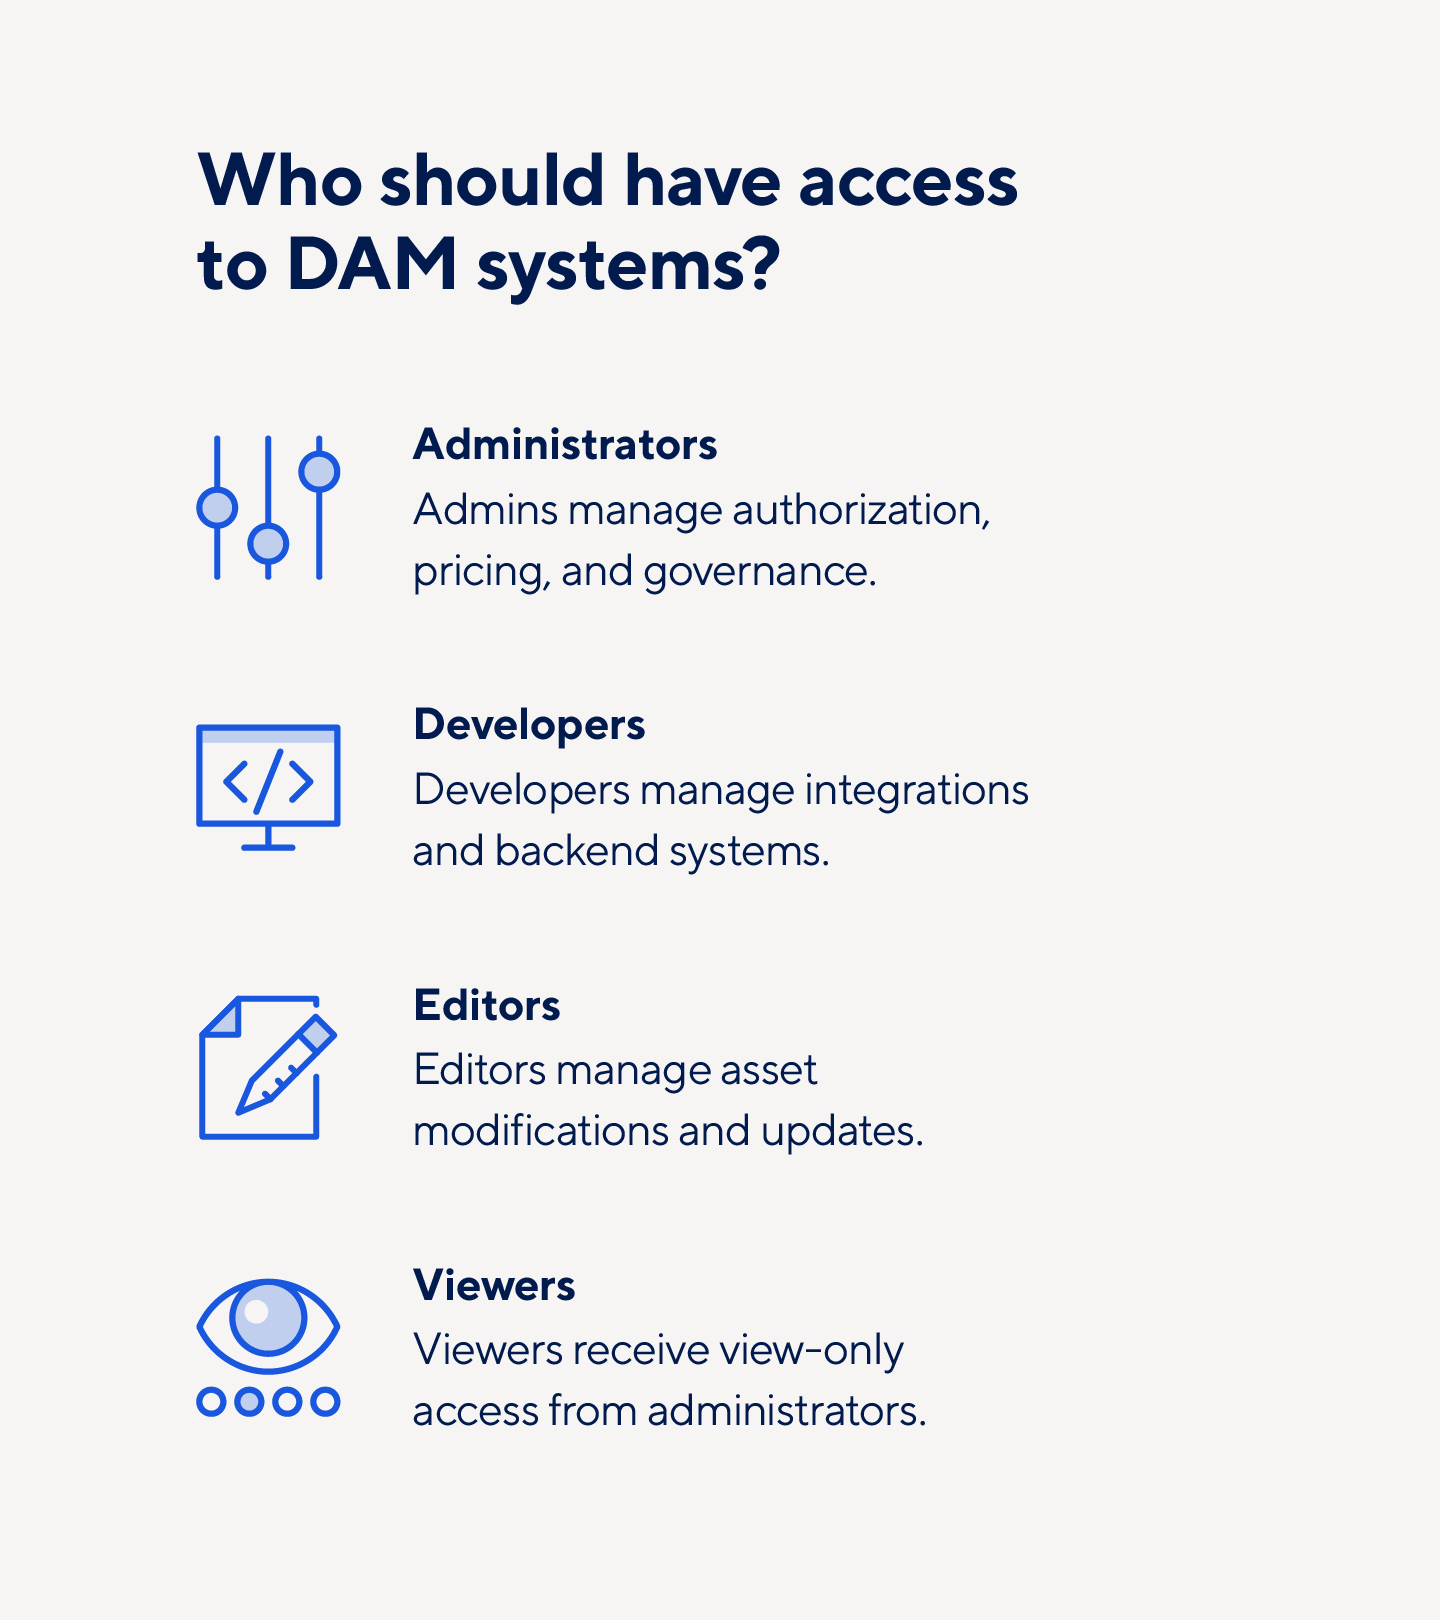 Administrators, developers, editors, and viewers should have different levels of DAM access.